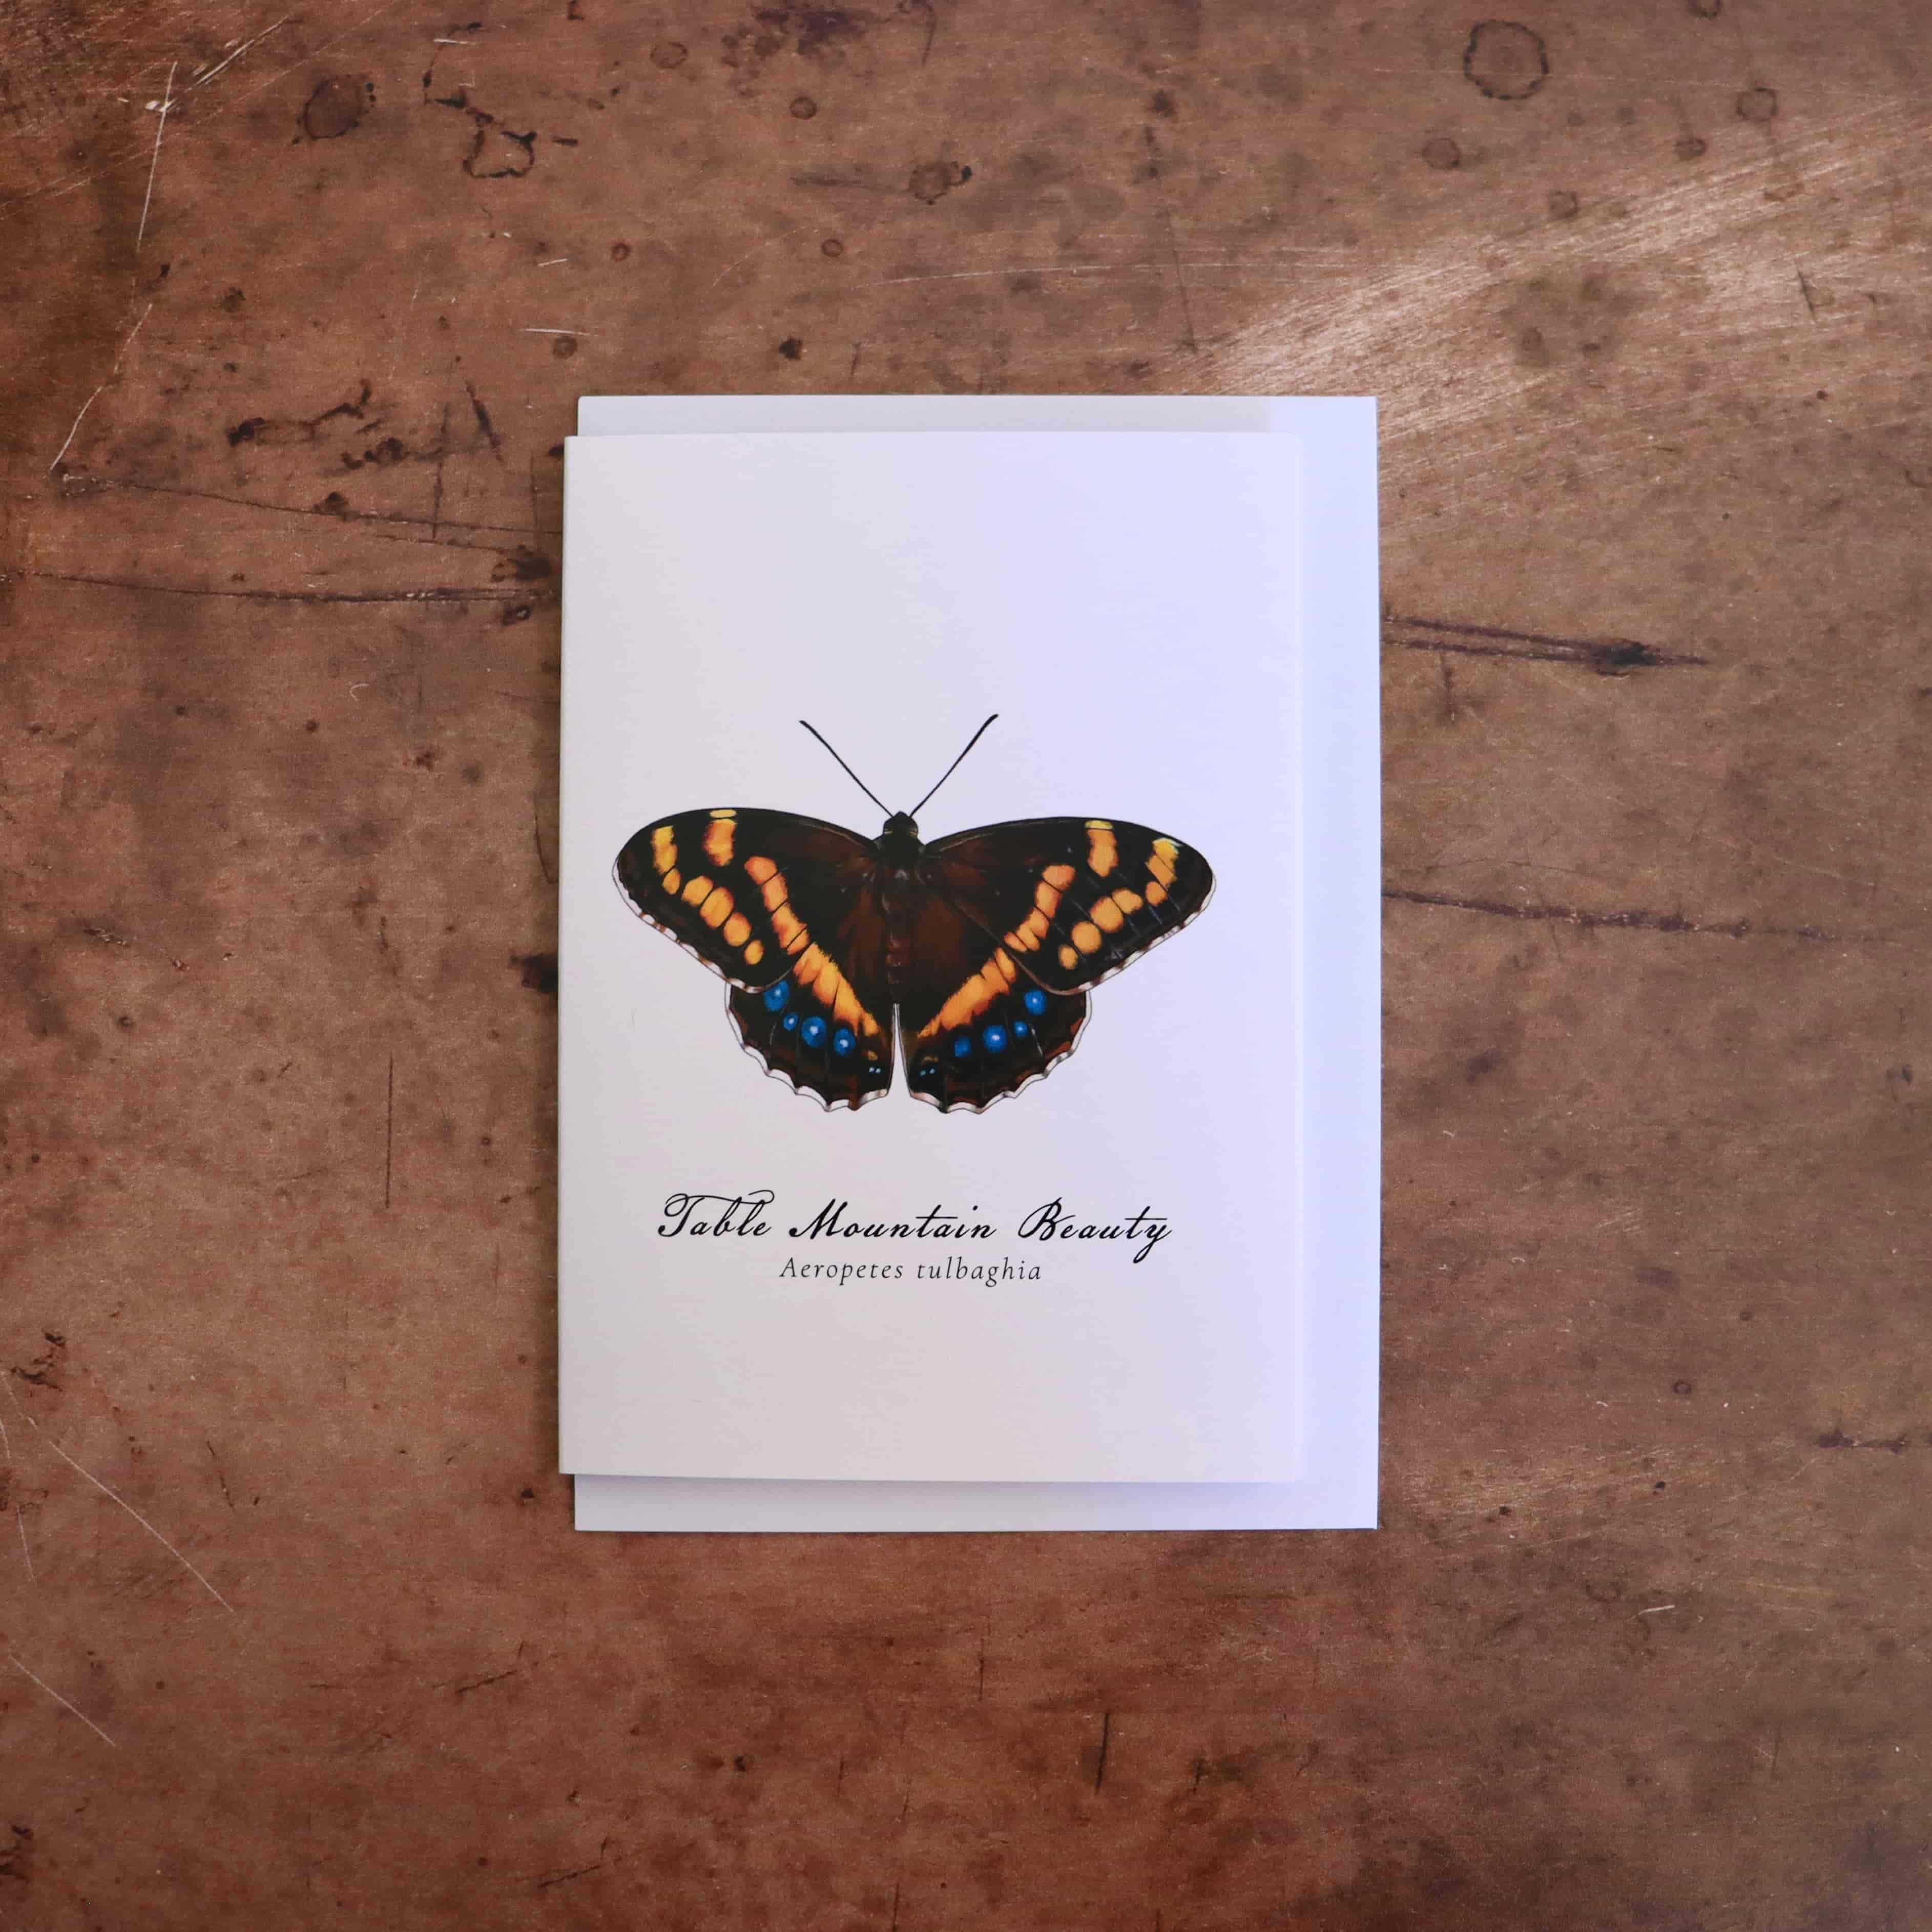 Table Mountain Beauty Butterfly Greeting Card